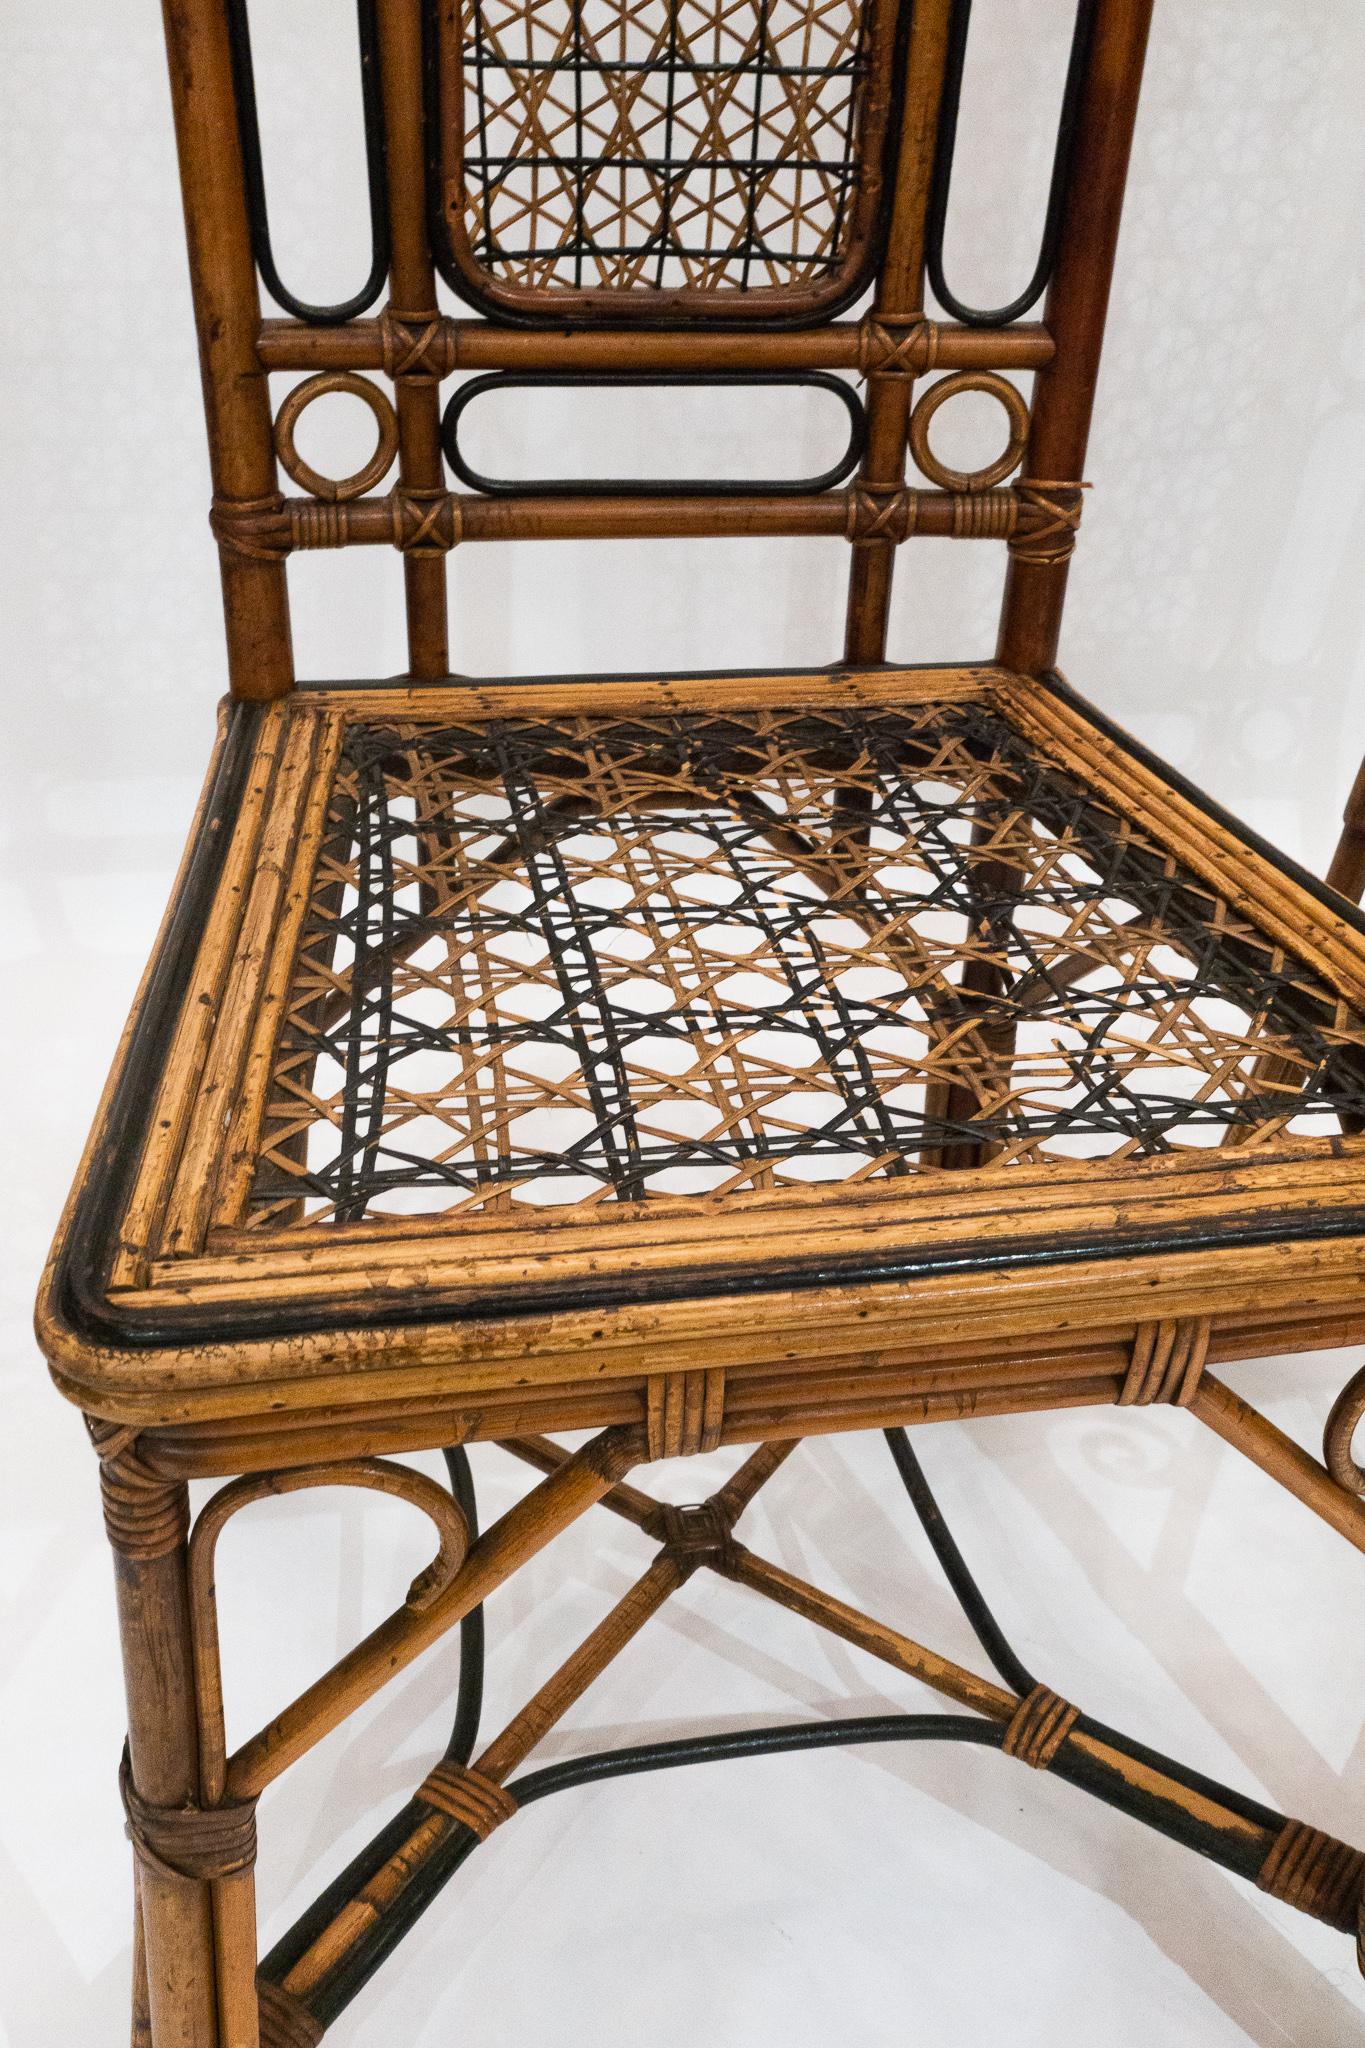 Unknown Elegant Pair of Bamboo and Wicker Chairs, Early 20th Century